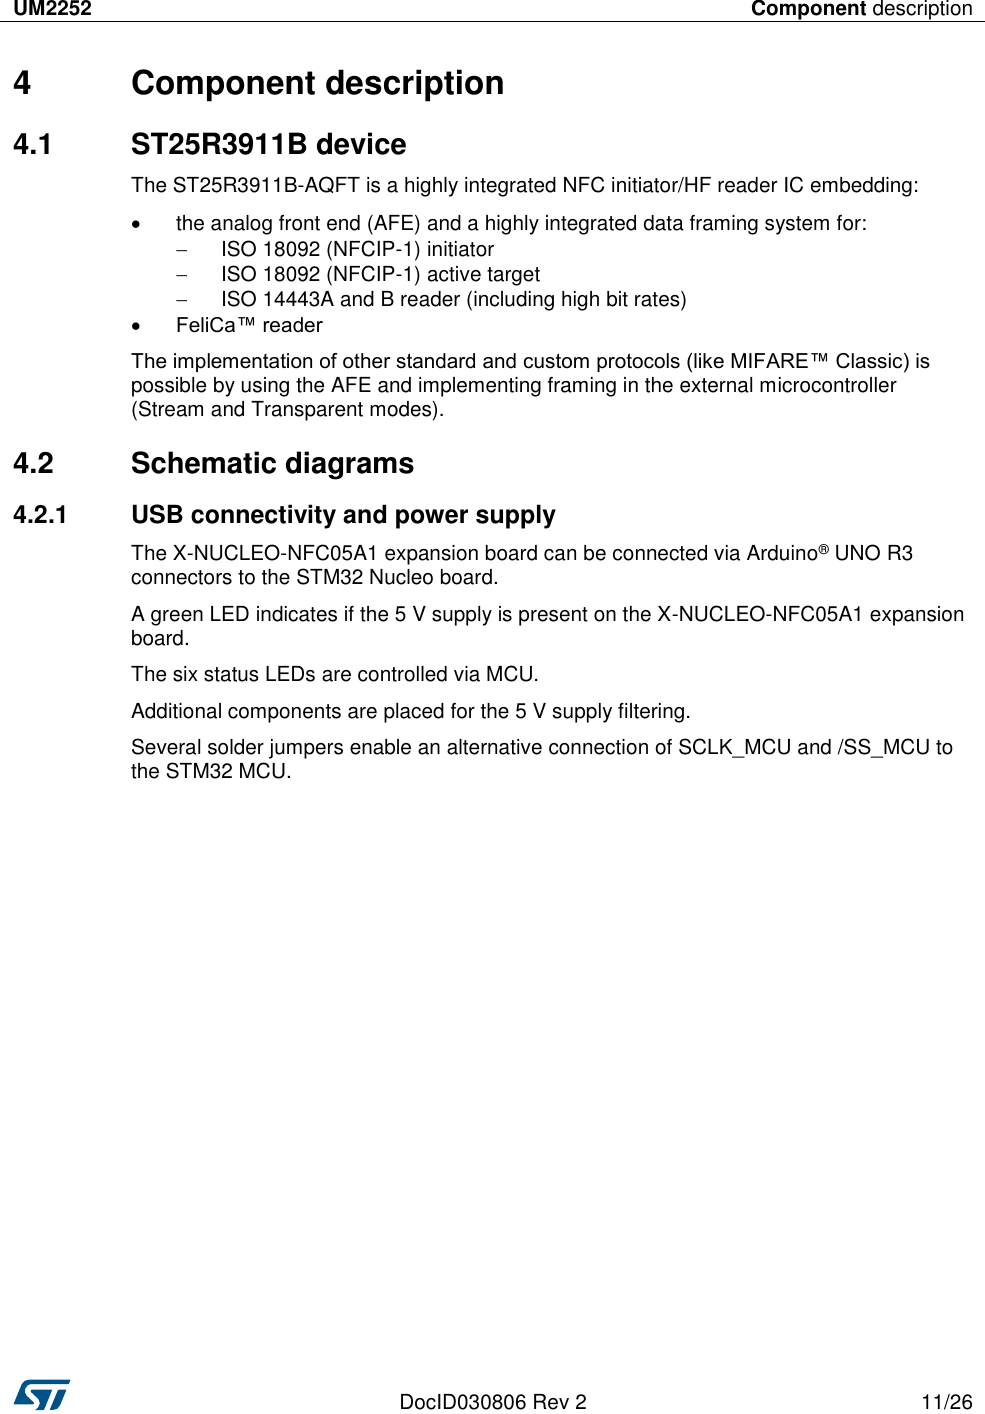 UM2252 Component description   DocID030806 Rev 2 11/26  4  Component description 4.1  ST25R3911B device The ST25R3911B-AQFT is a highly integrated NFC initiator/HF reader IC embedding:   the analog front end (AFE) and a highly integrated data framing system for:   ISO 18092 (NFCIP-1) initiator   ISO 18092 (NFCIP-1) active target   ISO 14443A and B reader (including high bit rates)  FeliCa™ reader The implementation of other standard and custom protocols (like MIFARE™ Classic) is possible by using the AFE and implementing framing in the external microcontroller (Stream and Transparent modes). 4.2  Schematic diagrams 4.2.1  USB connectivity and power supply  The X-NUCLEO-NFC05A1 expansion board can be connected via Arduino® UNO R3 connectors to the STM32 Nucleo board. A green LED indicates if the 5 V supply is present on the X-NUCLEO-NFC05A1 expansion board. The six status LEDs are controlled via MCU. Additional components are placed for the 5 V supply filtering. Several solder jumpers enable an alternative connection of SCLK_MCU and /SS_MCU to the STM32 MCU. 